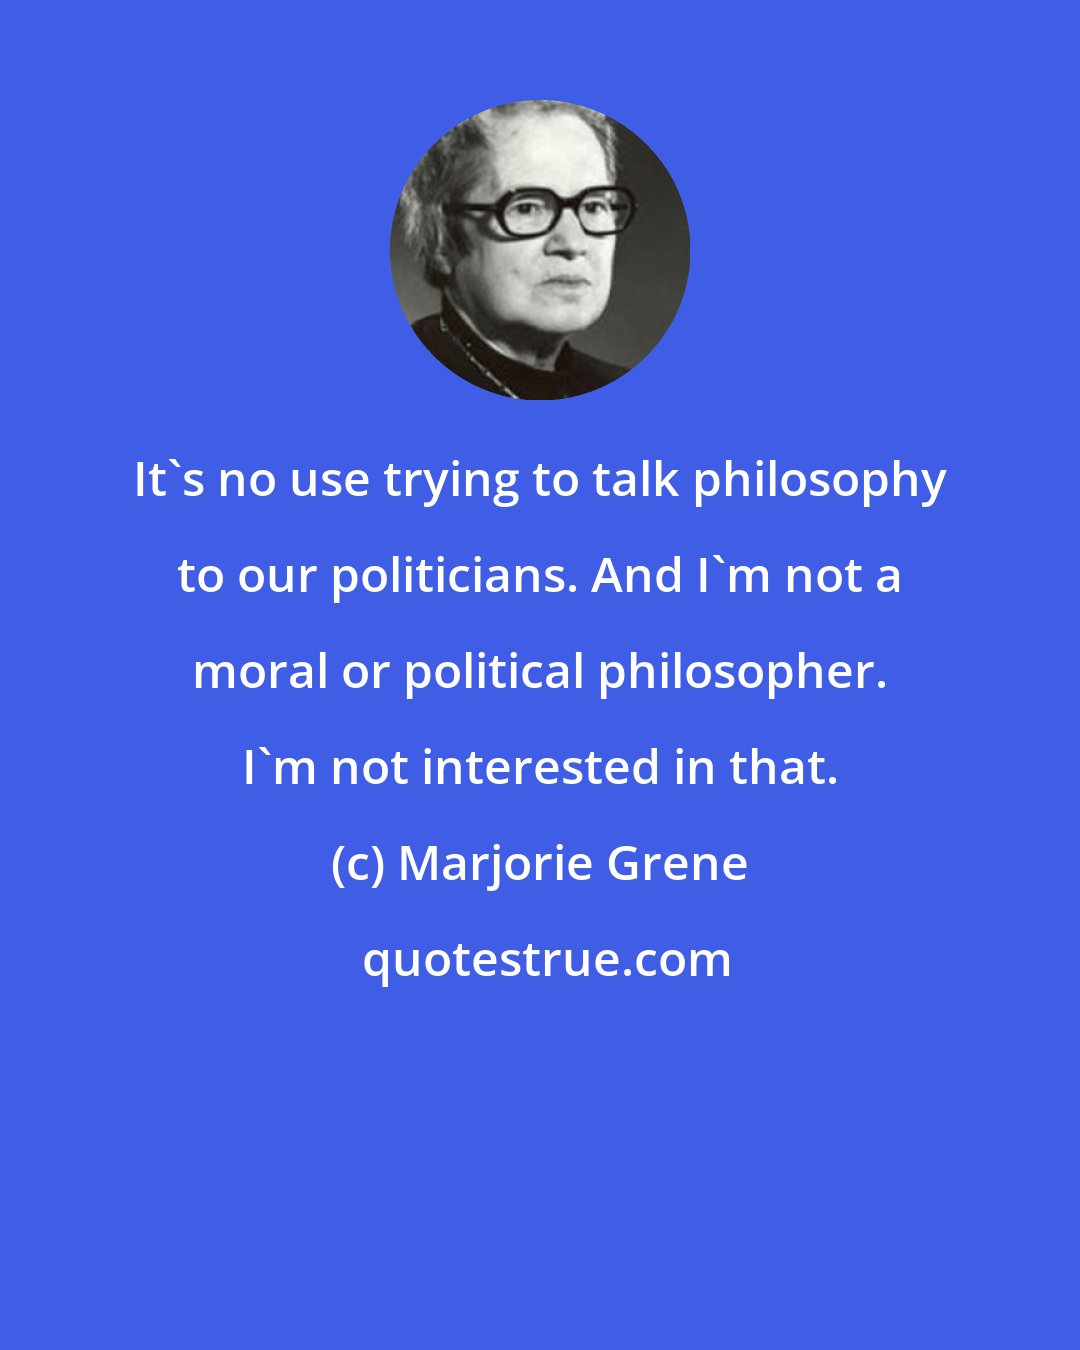 Marjorie Grene: It's no use trying to talk philosophy to our politicians. And I'm not a moral or political philosopher. I'm not interested in that.